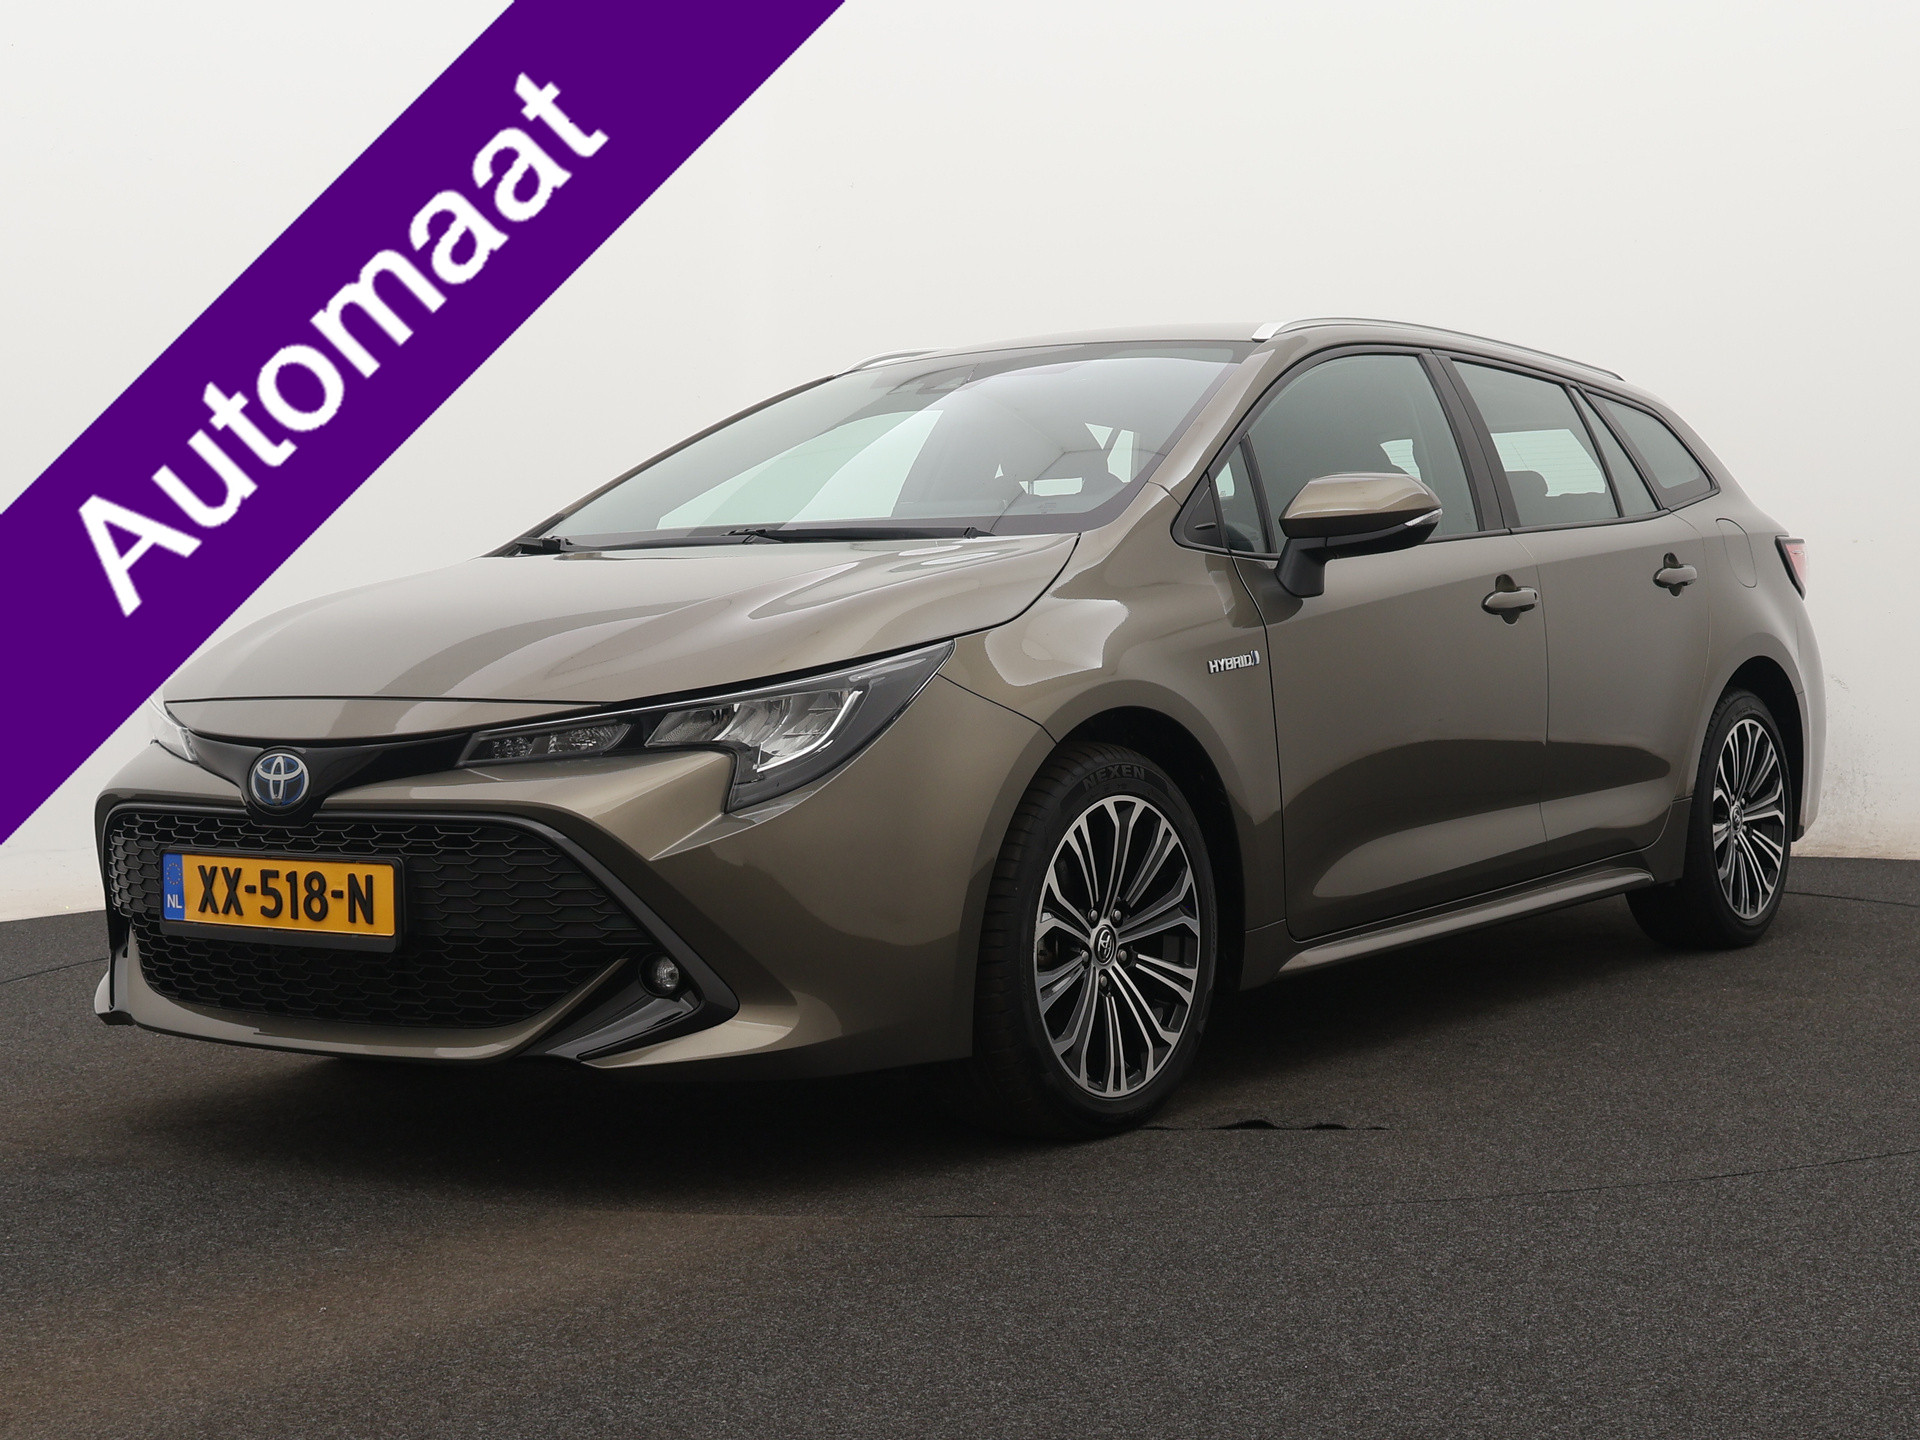 Toyota Corolla Touring Sports 1.8 Hybrid First Edition Navigatie, achteruitrij camera, climate control, etc...